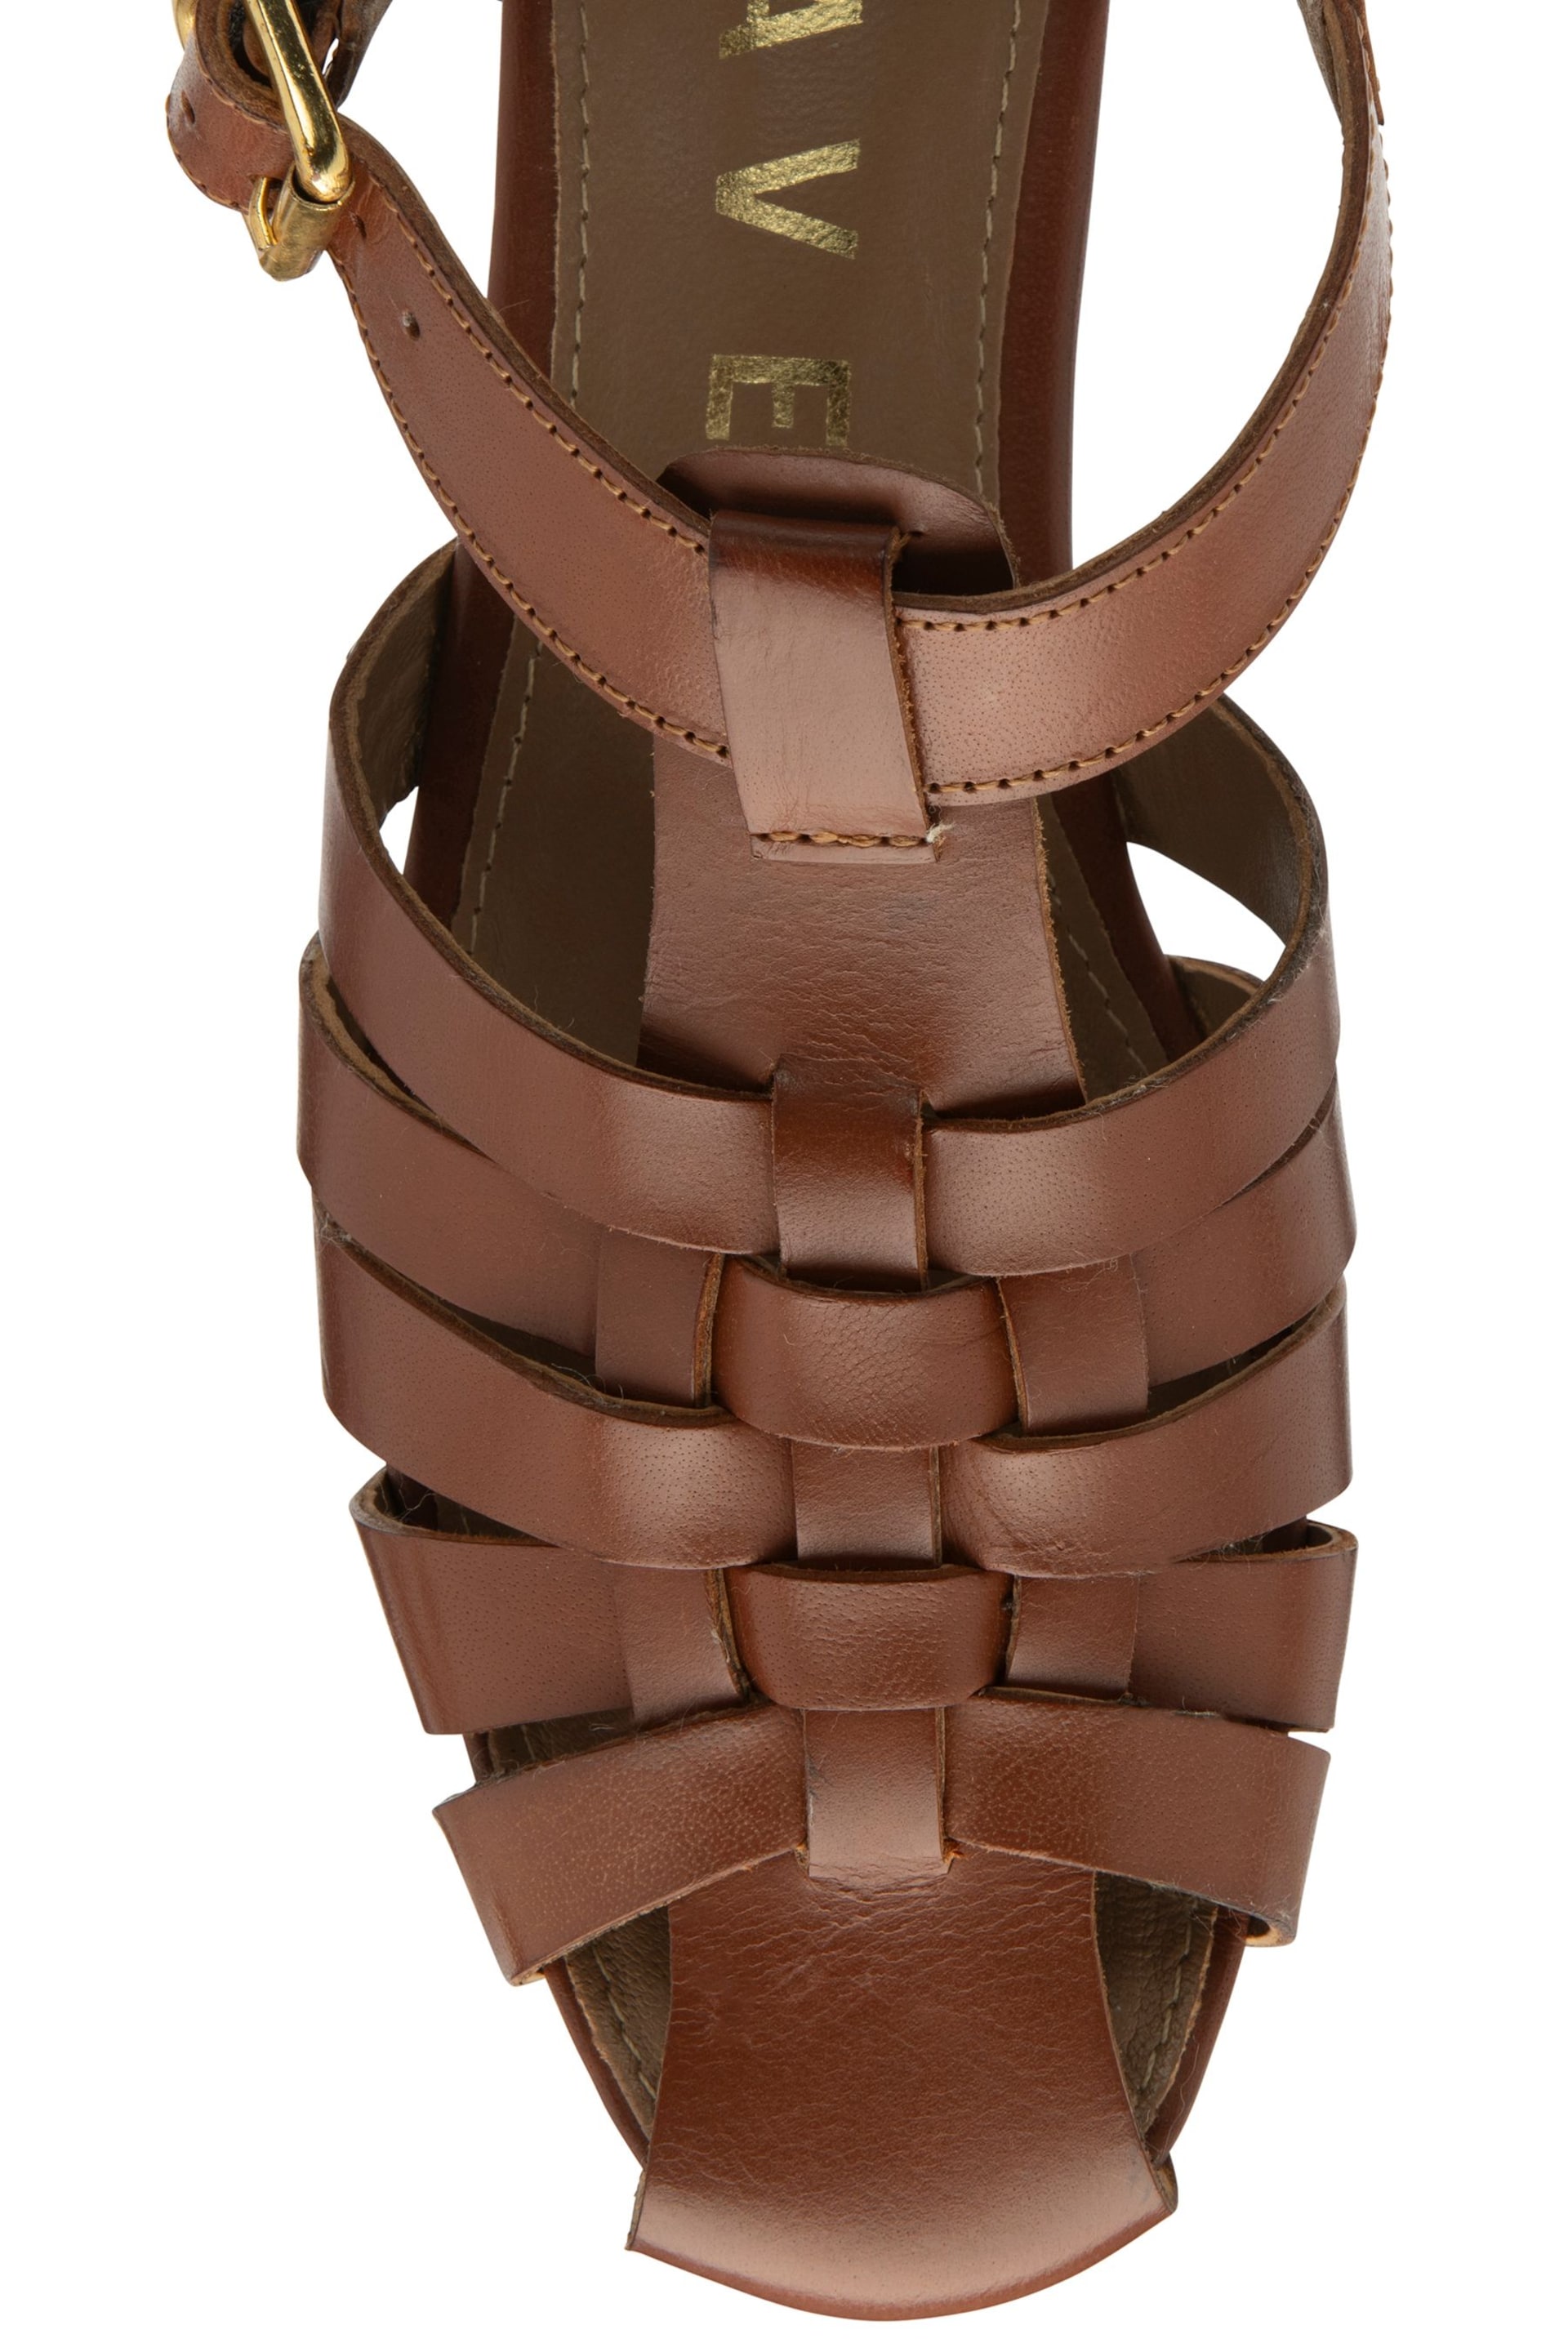 Ravel Brown Flat Leather Fisherman Sandals - Image 4 of 4